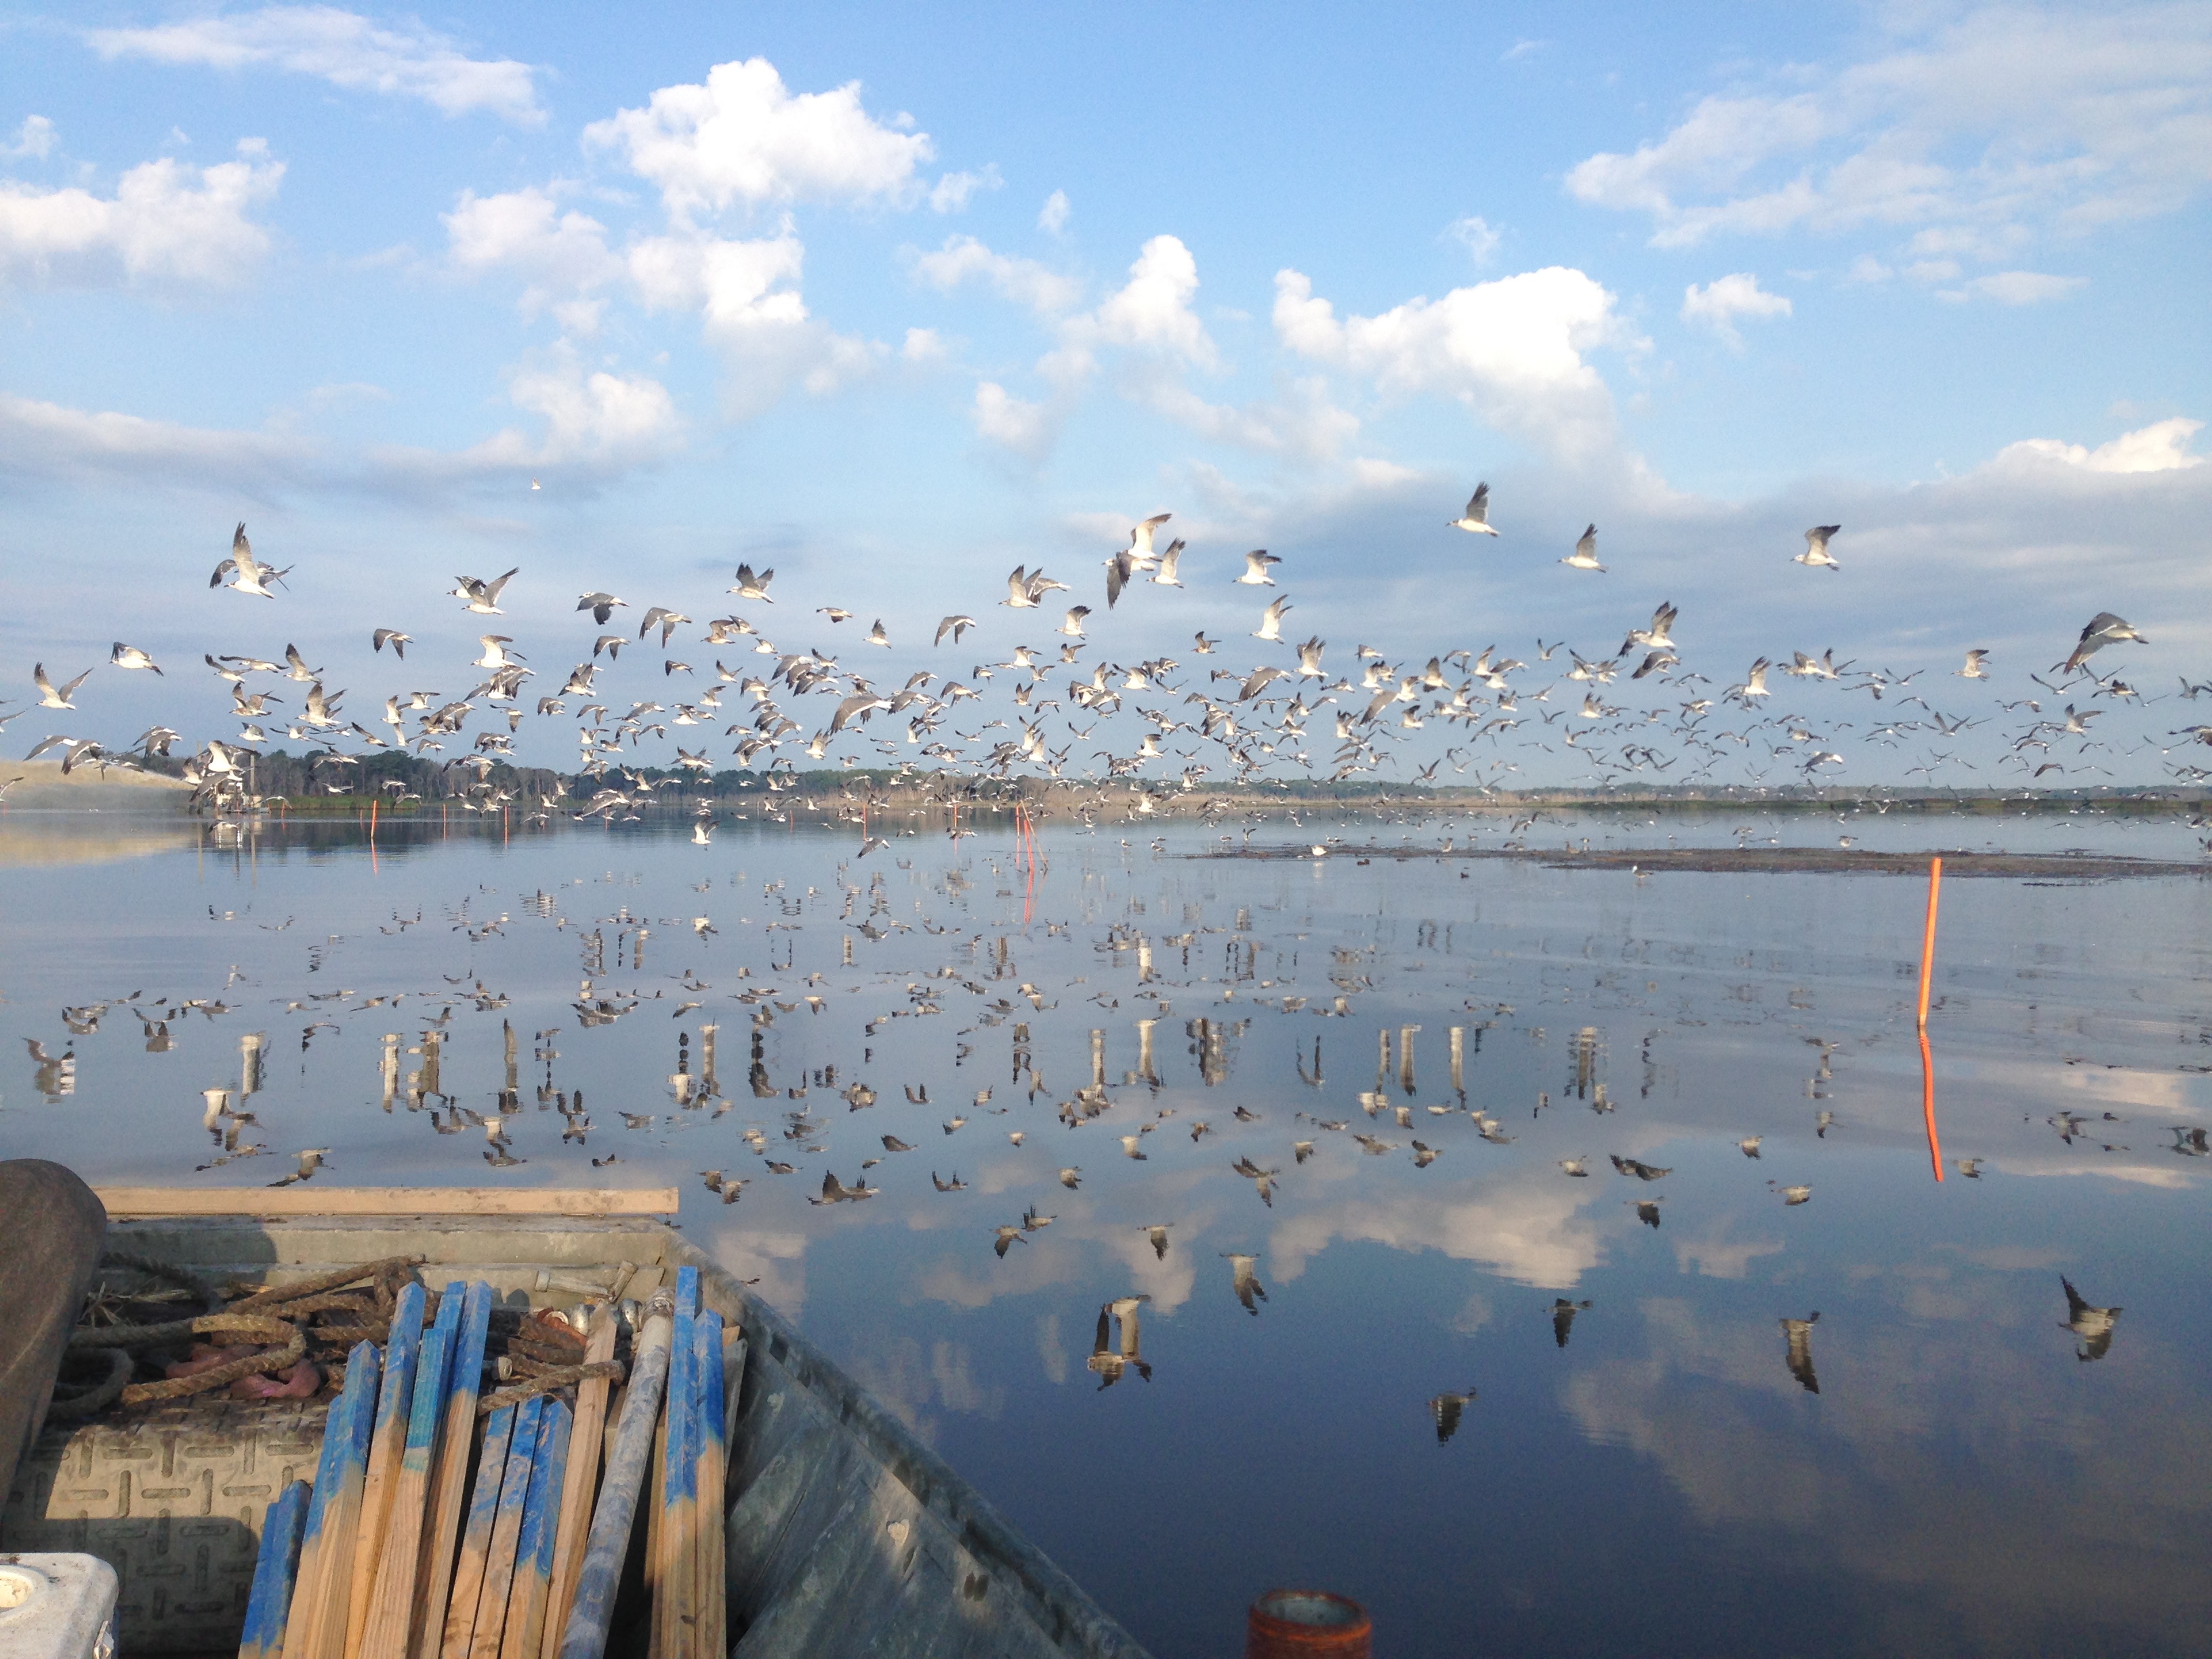 a large flock of birds fly over water, their reflection can be seen on the surface